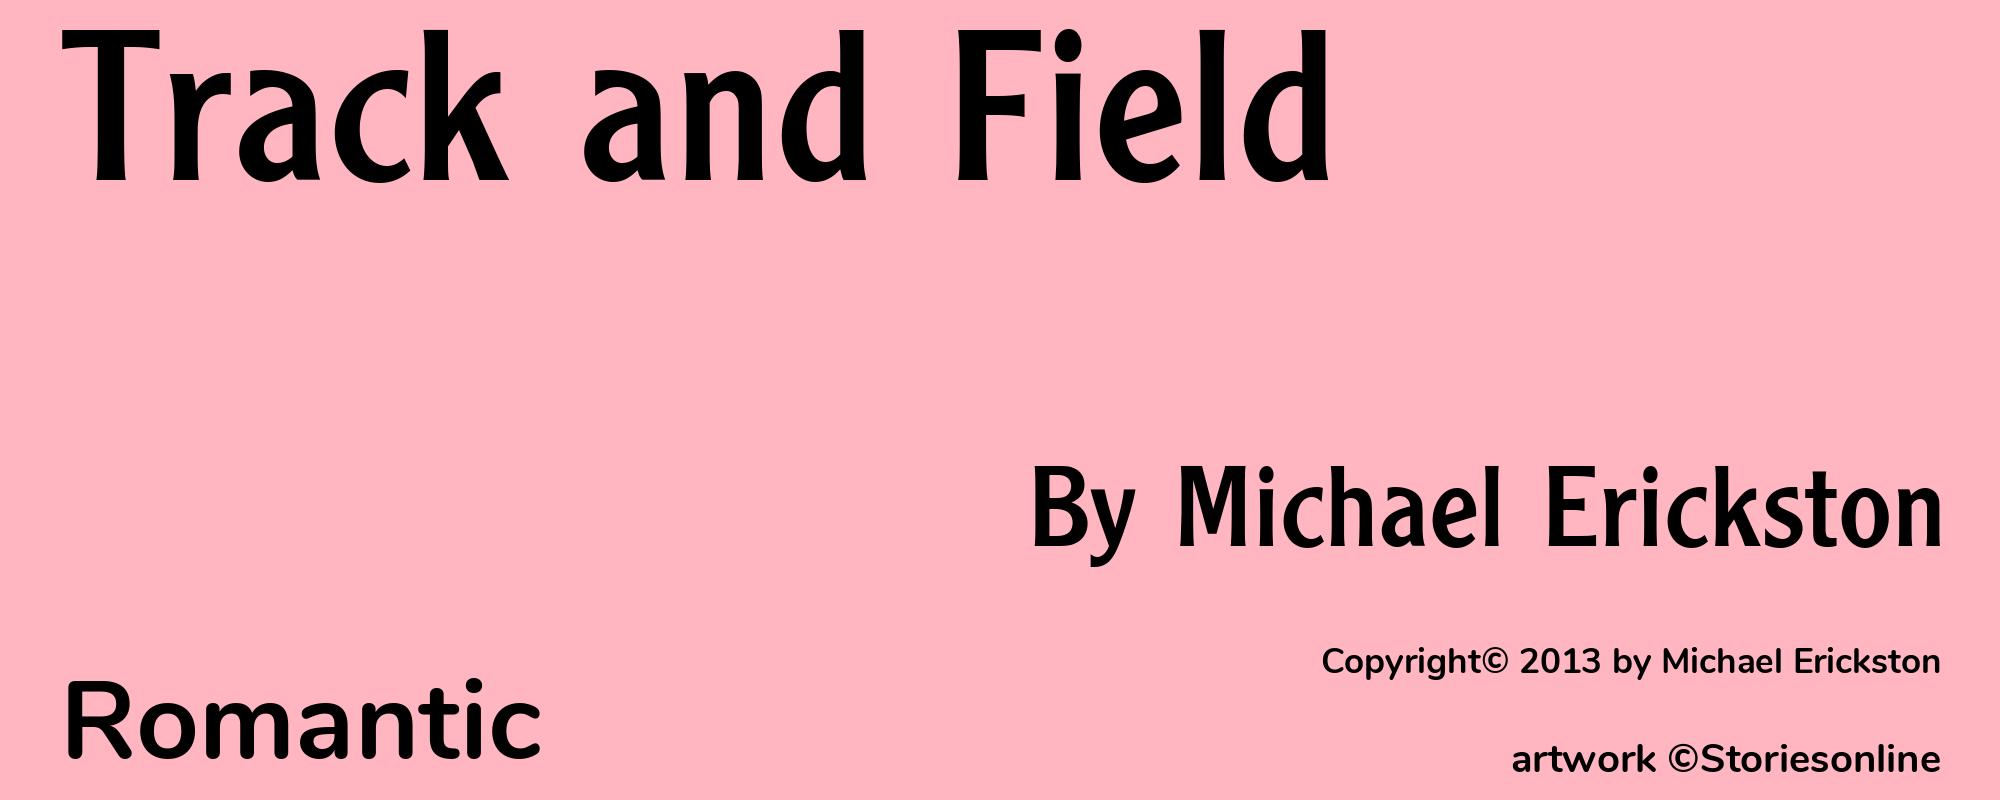 Track and Field - Cover